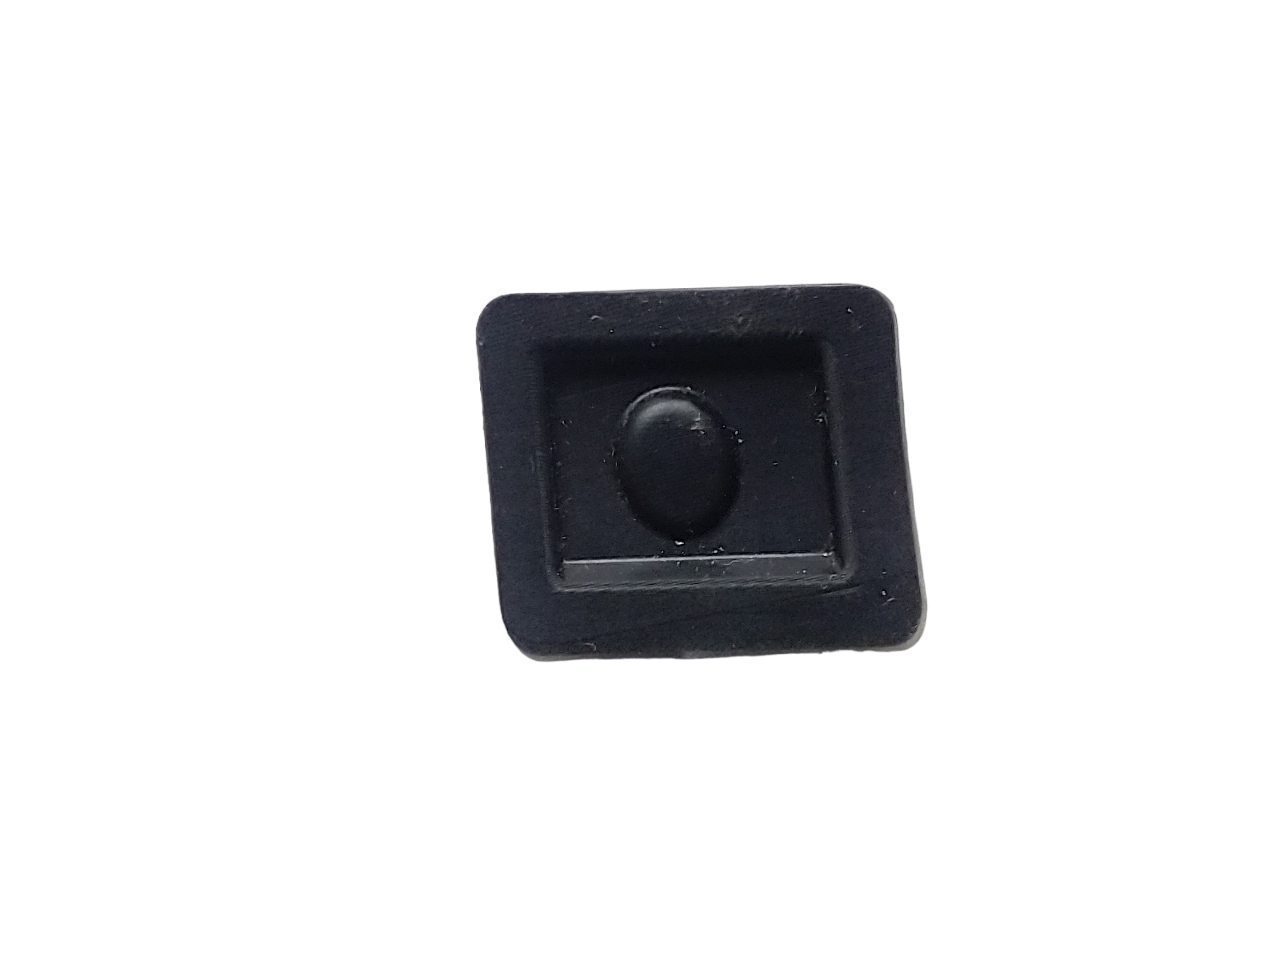 Inmotion V12 Button Cover